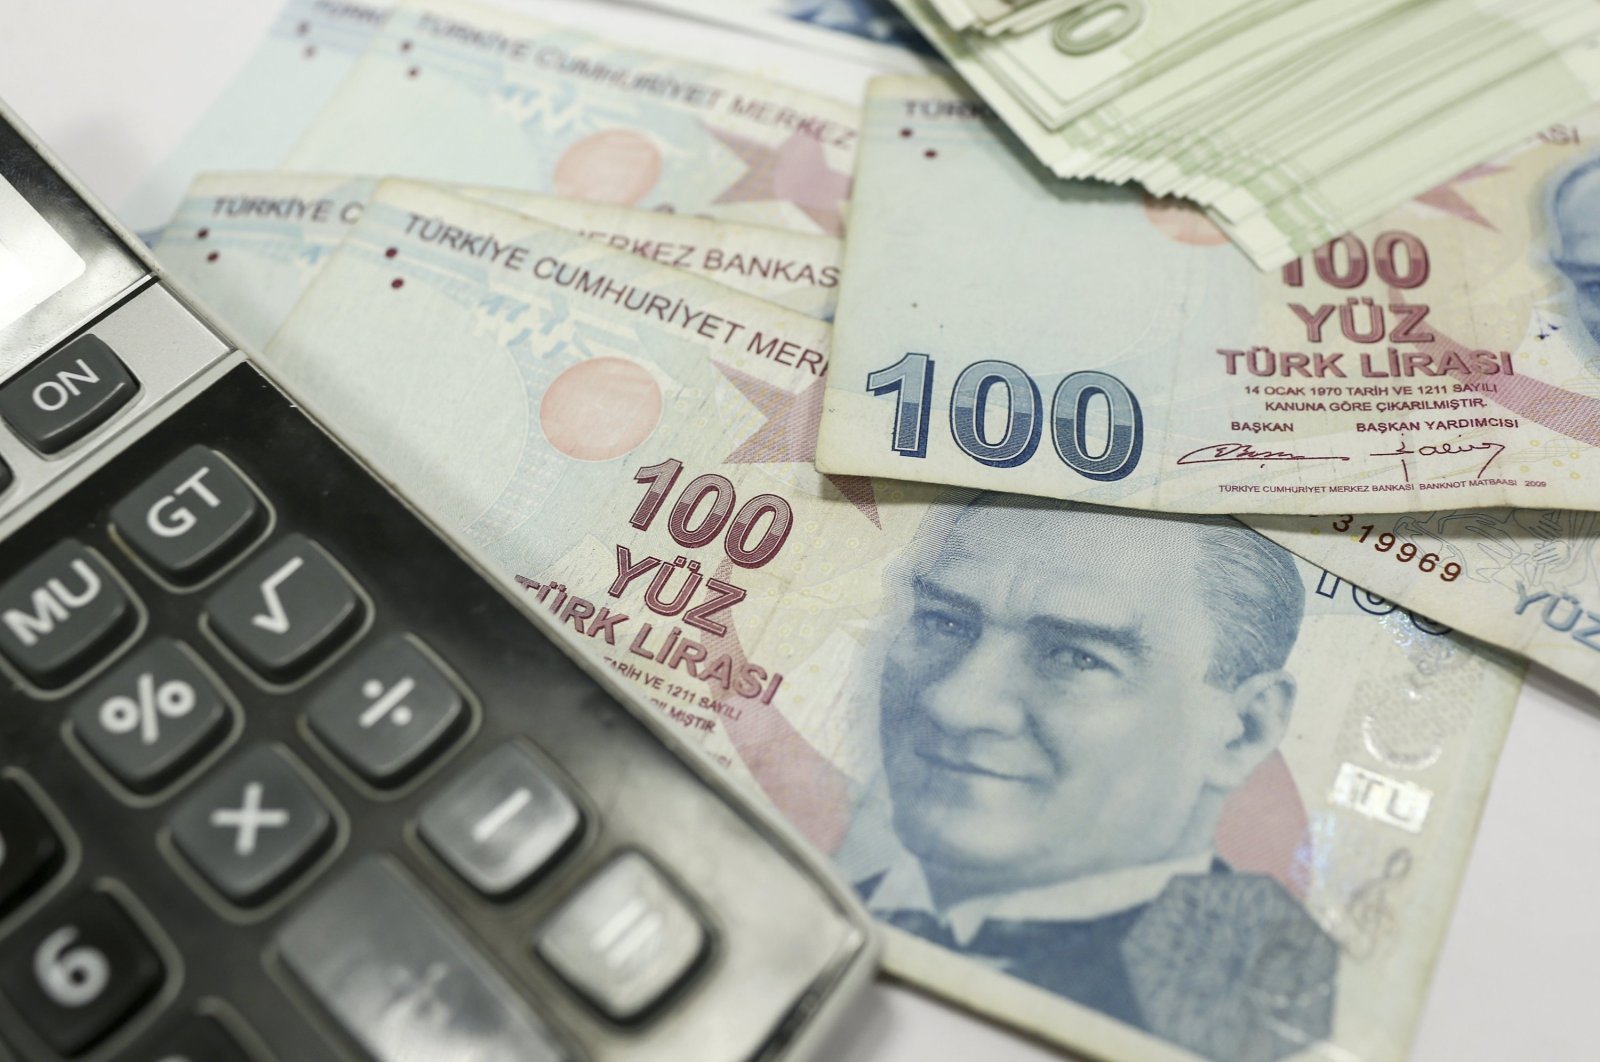 This undated file photo shows Turkish lira banknotes next to a calculator. (AA Photo)